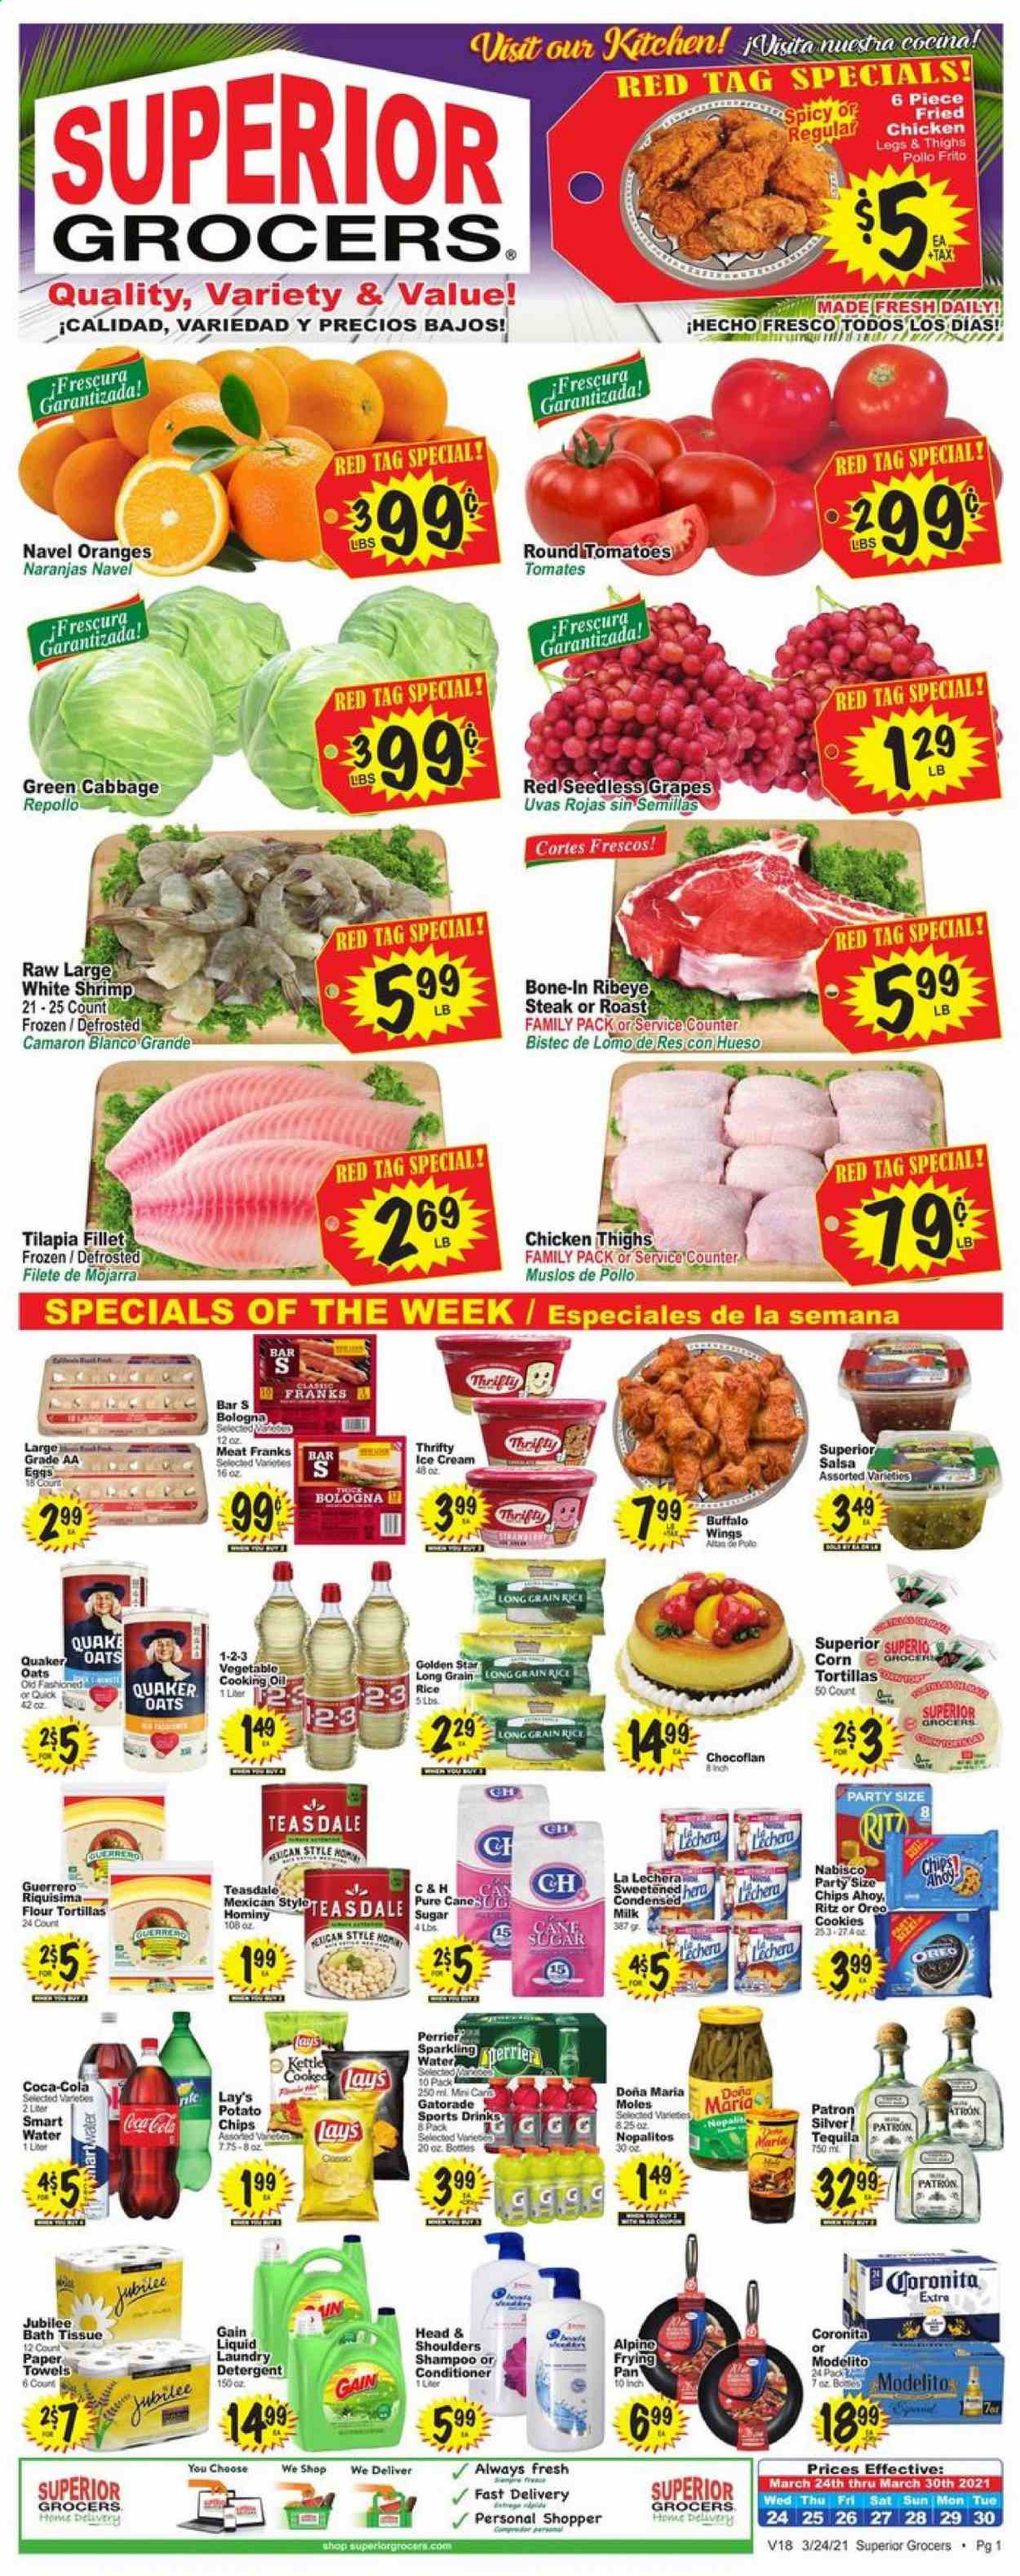 thumbnail - Superior Grocers Flyer - 03/24/2021 - 03/30/2021 - Sales products - seedless grapes, tortillas, oranges, chicken legs, chicken thighs, beef meat, beef steak, steak, bone-in ribeye, ribeye steak, tilapia, shrimps, fried chicken, Quaker, bologna sausage, Oreo, milk, eggs, salsa, corn, cookies, RITZ, Lay’s, sugar, oats, rice, whole grain rice, long grain rice, oil, Coca-Cola, Perrier, Gatorade, sparkling water, tequila, Gain, laundry detergent, conditioner, Head & Shoulders, pan, grapes. Page 1.